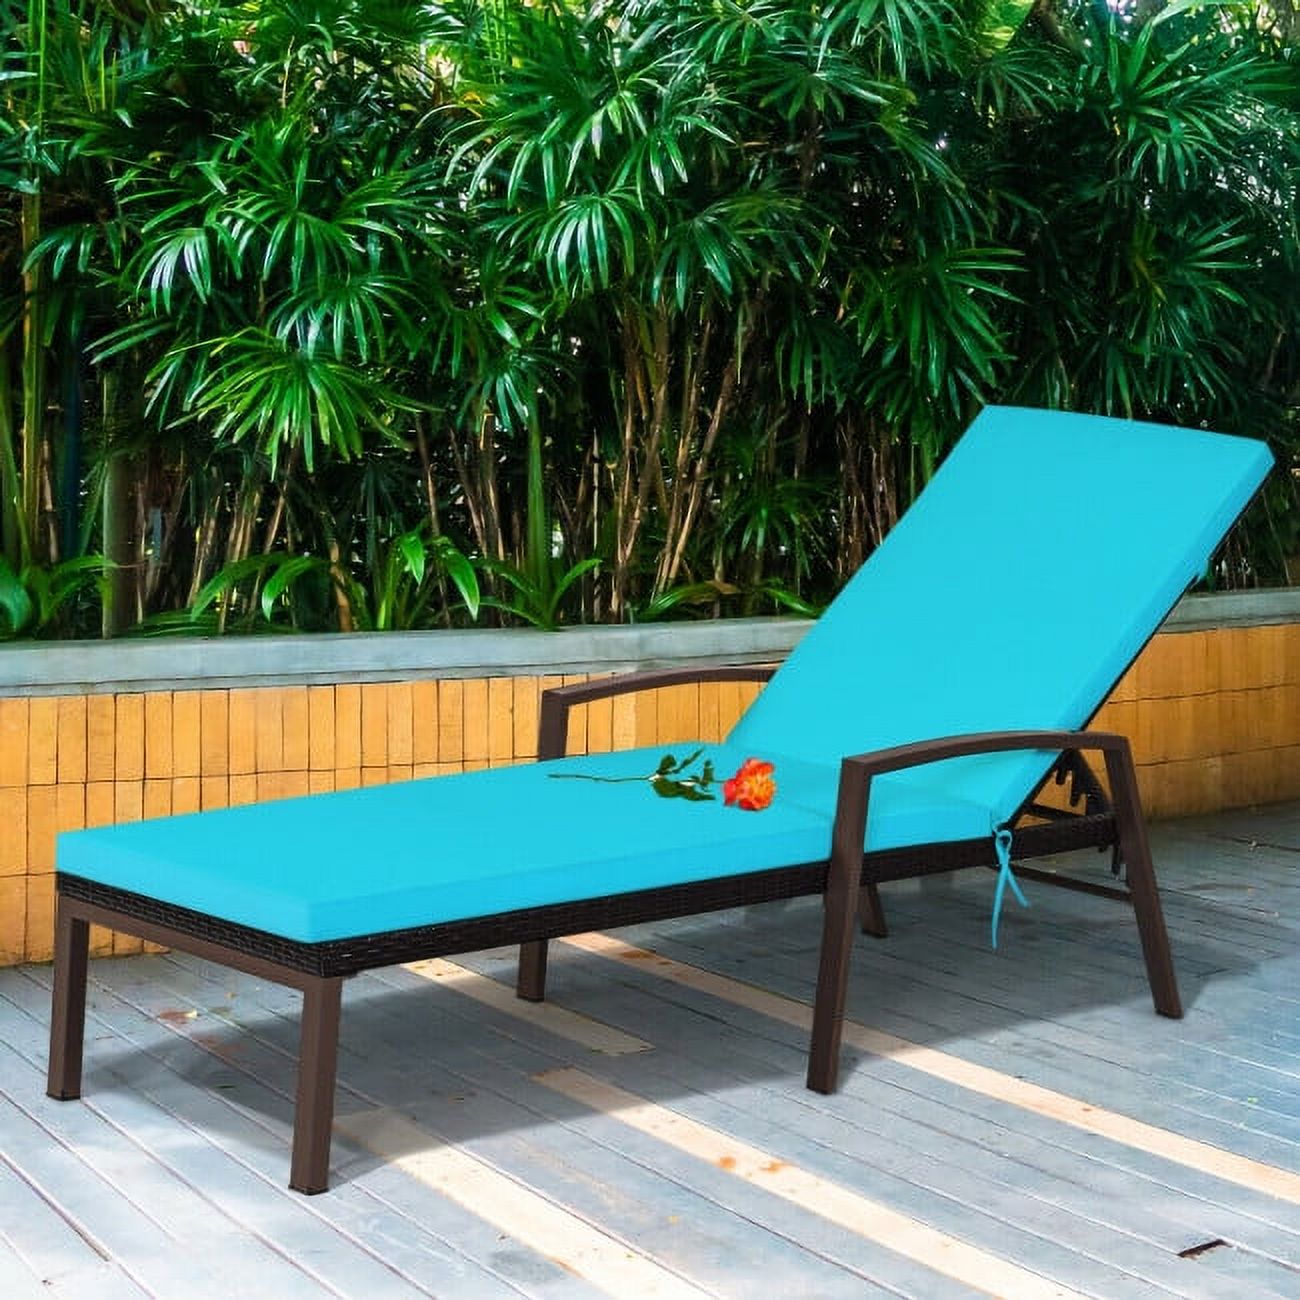 GIVIMO Outdoor Adjustable Reclining Patio Rattan Lounge Chair Turquoise - image 3 of 8